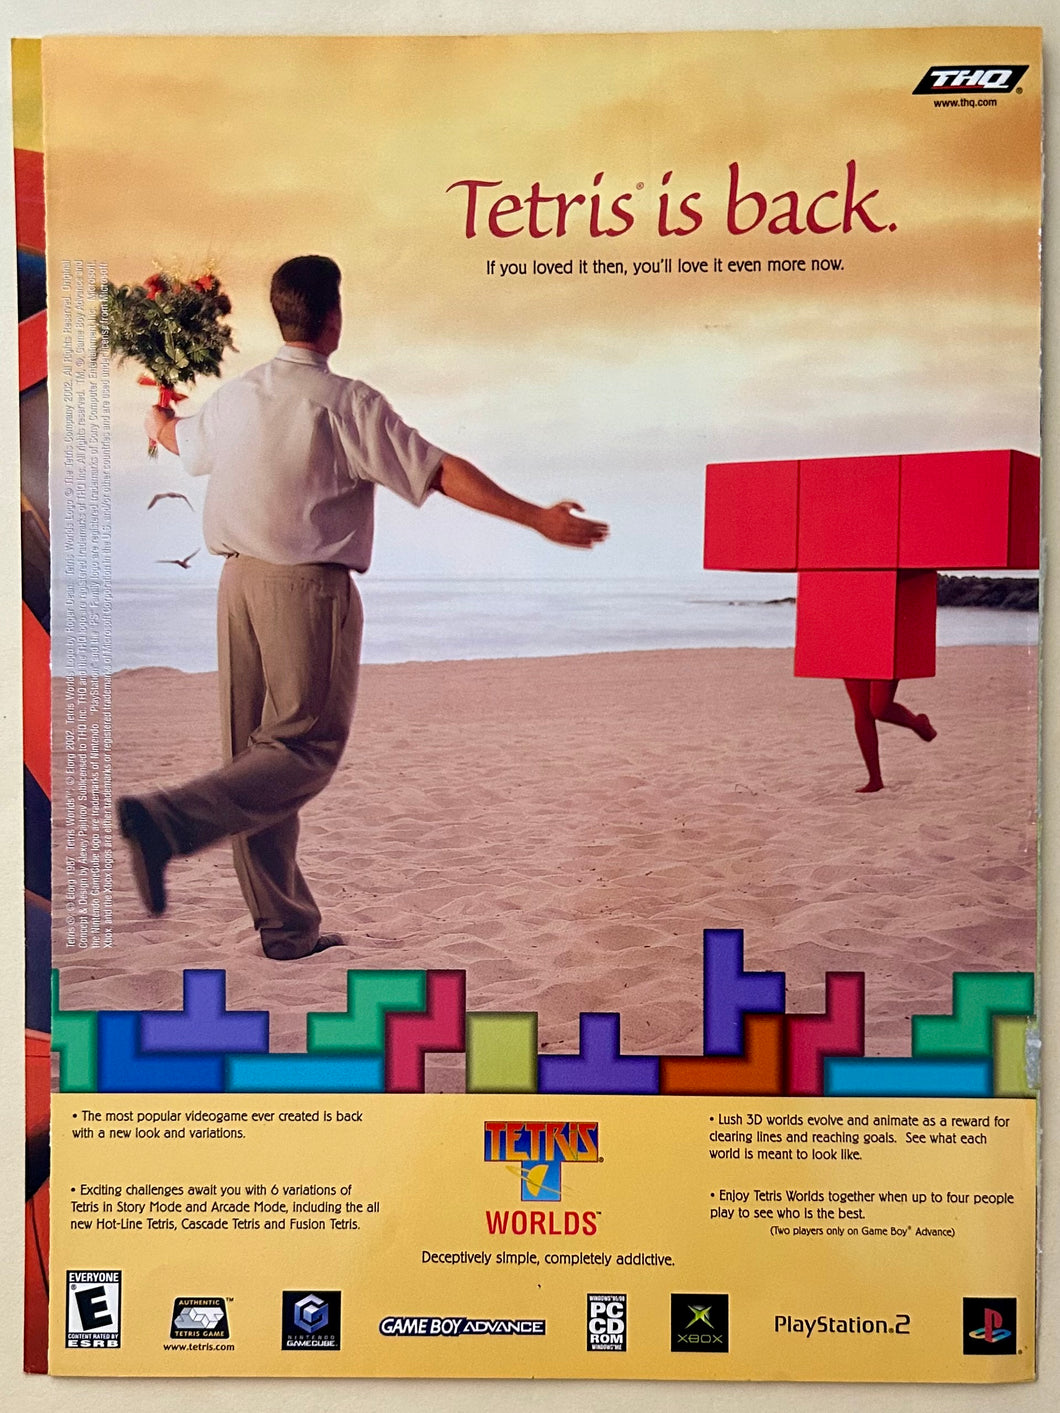 Tetris Worlds - PS2 Xbox NGC GBA PC - Original Vintage Advertisement - Print Ads - Laminated A4 Poster